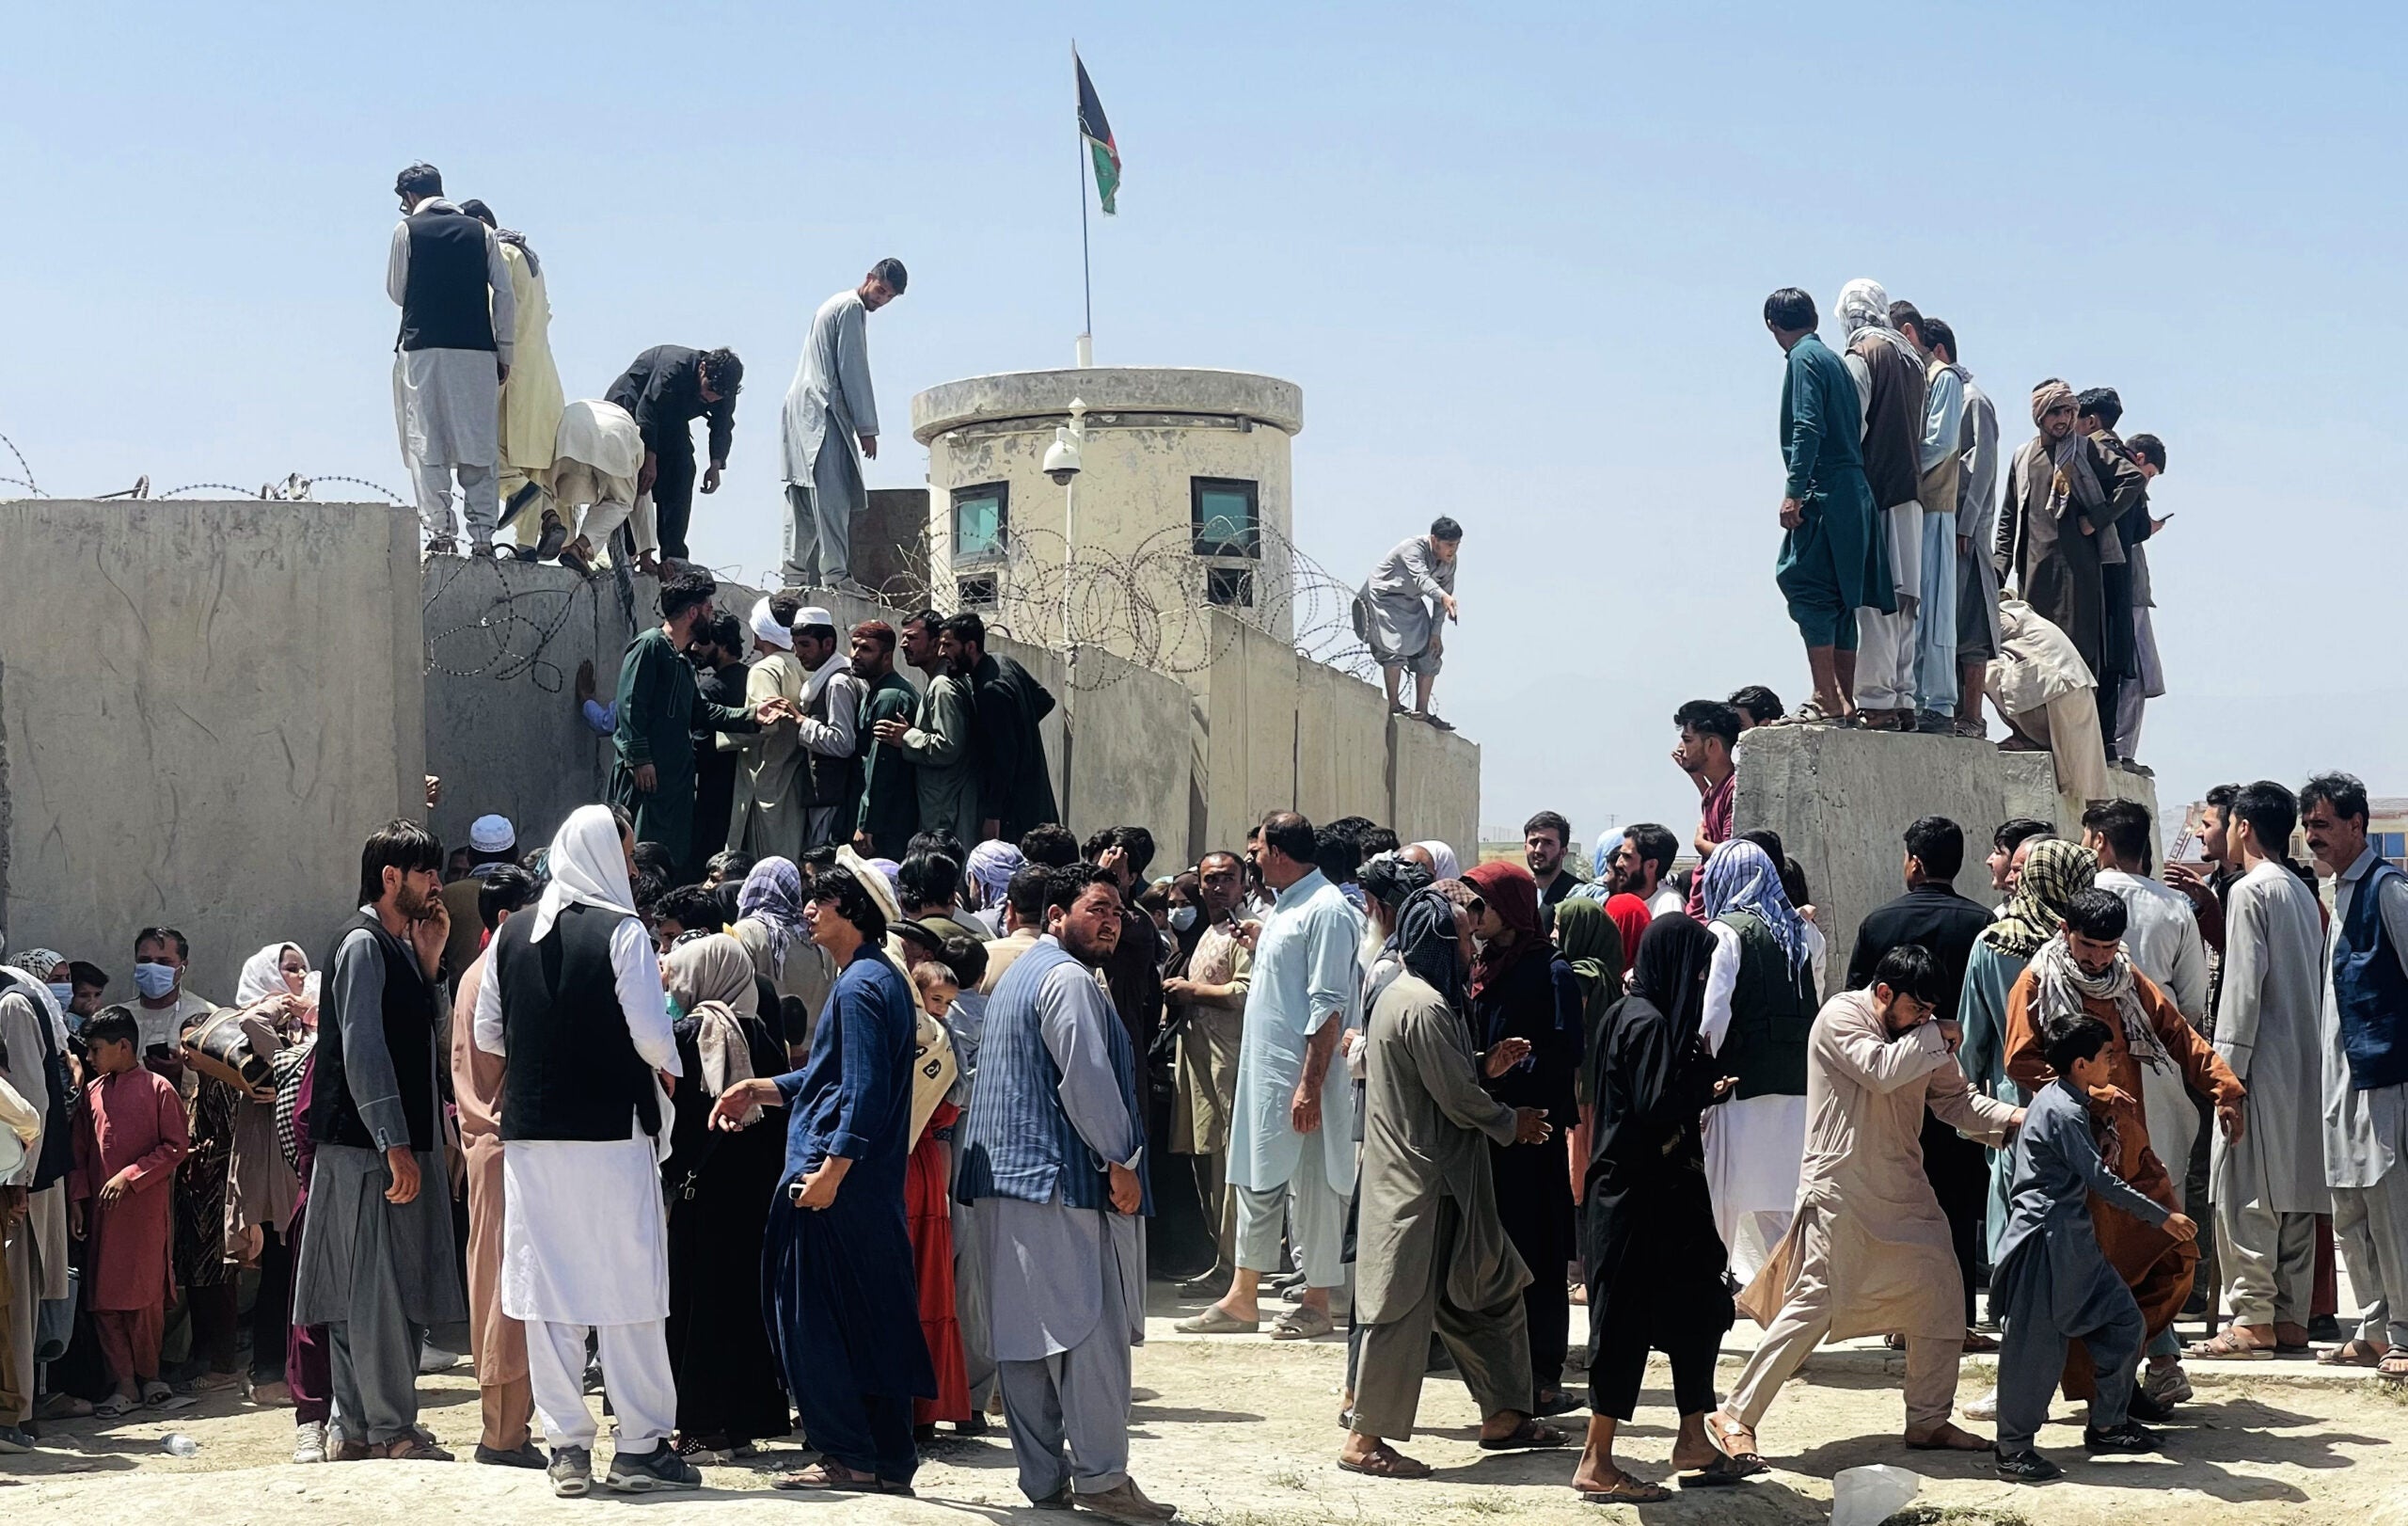 KABUL, AFGHANISTAN-AUGUST 16: Thousands of Afghans rush to the Hamid Karzai International Airport as they try to flee the Afghan capital of Kabul, Afghanistan, on August 16, 2021. (Photo by Haroon Sabawoon/Anadolu Agency via Getty Images)